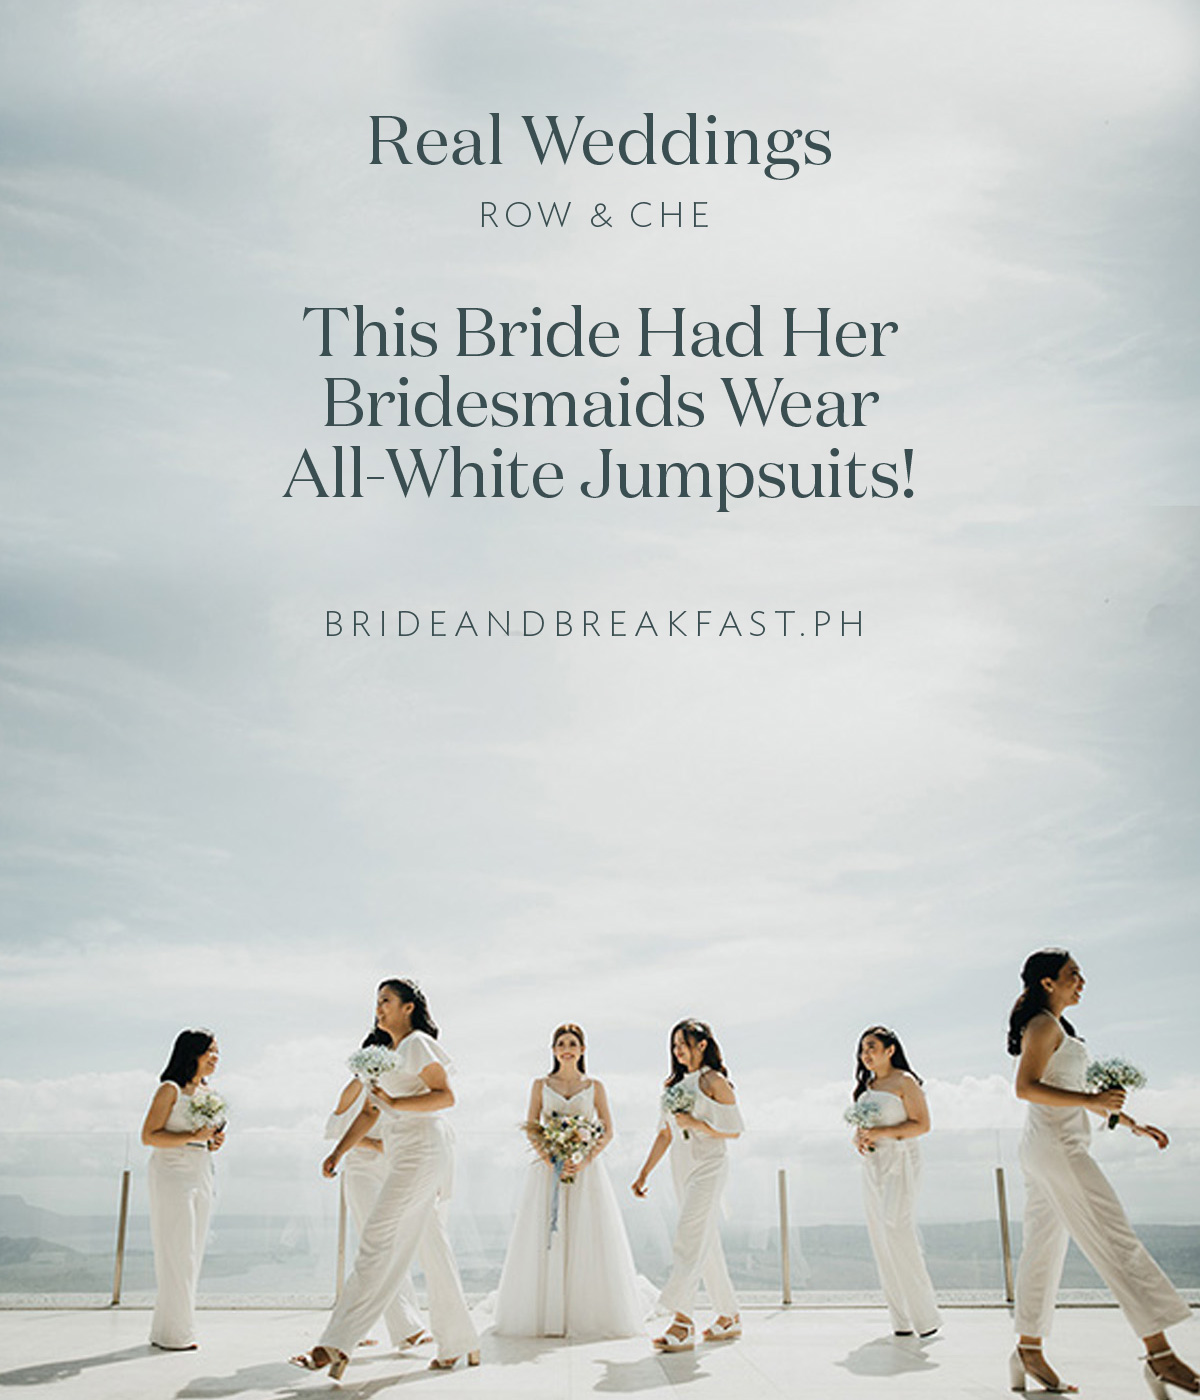 This Bride Had Her Bridesmaids Wear All-White Jumpsuits!